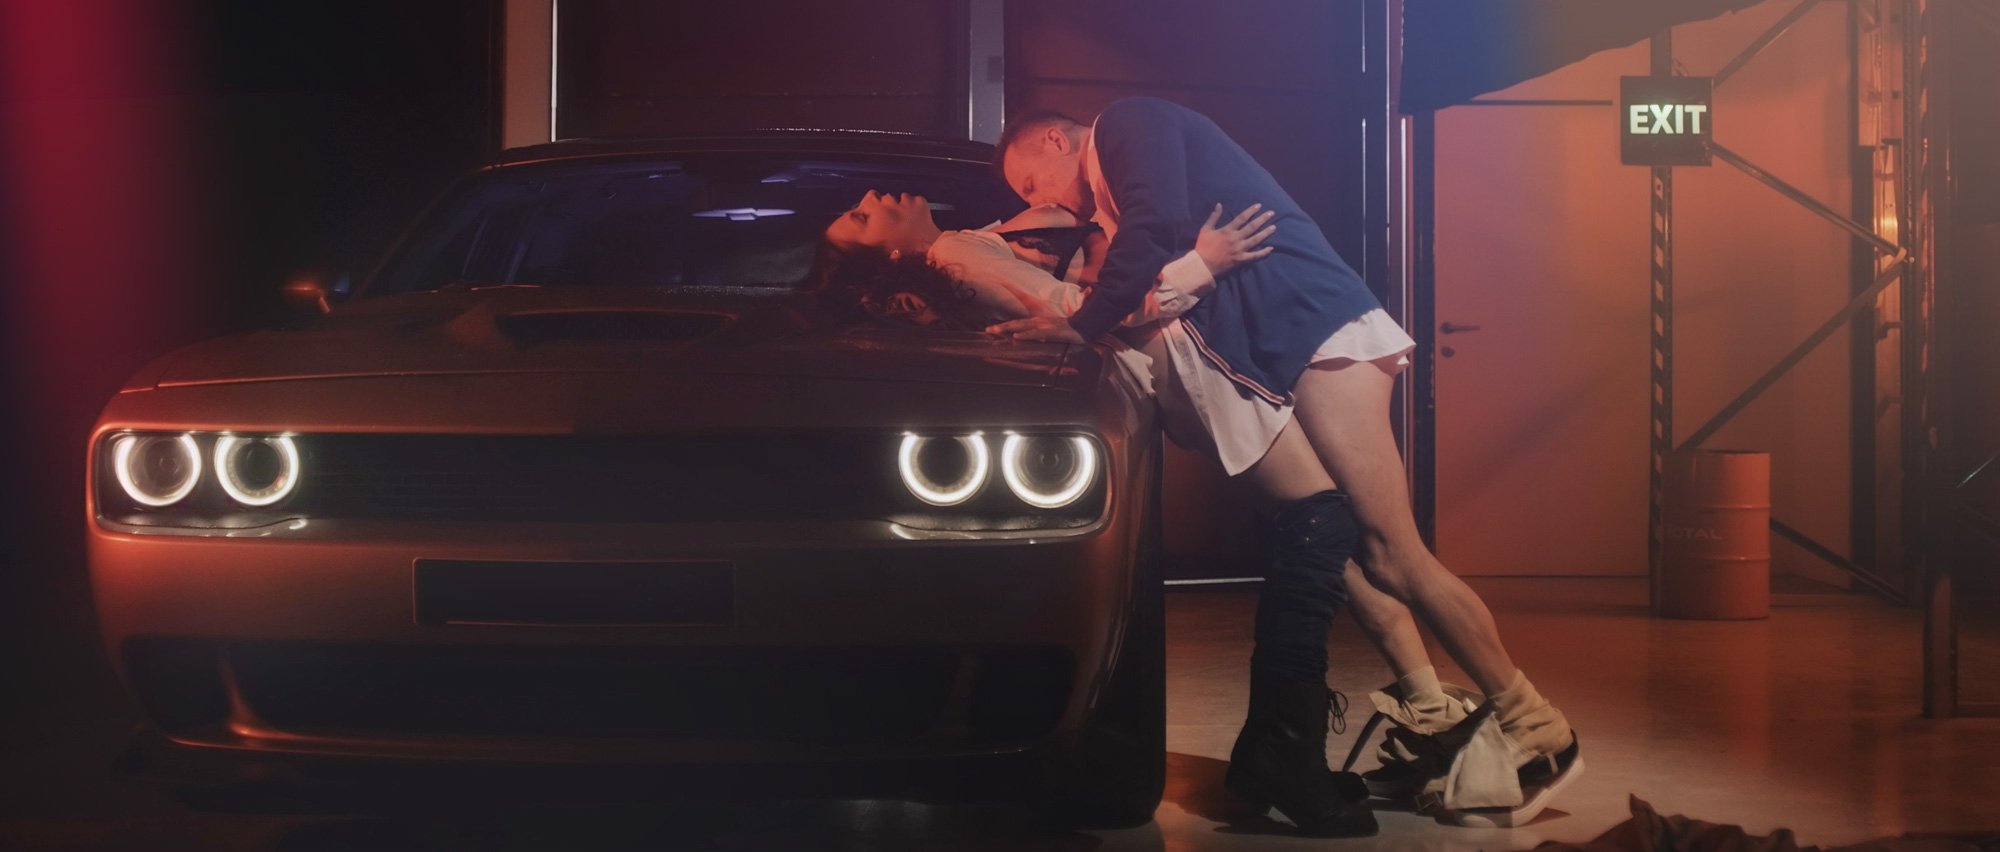 Frantically horny couple pull into a public garage to enjoy a passionate car fuck